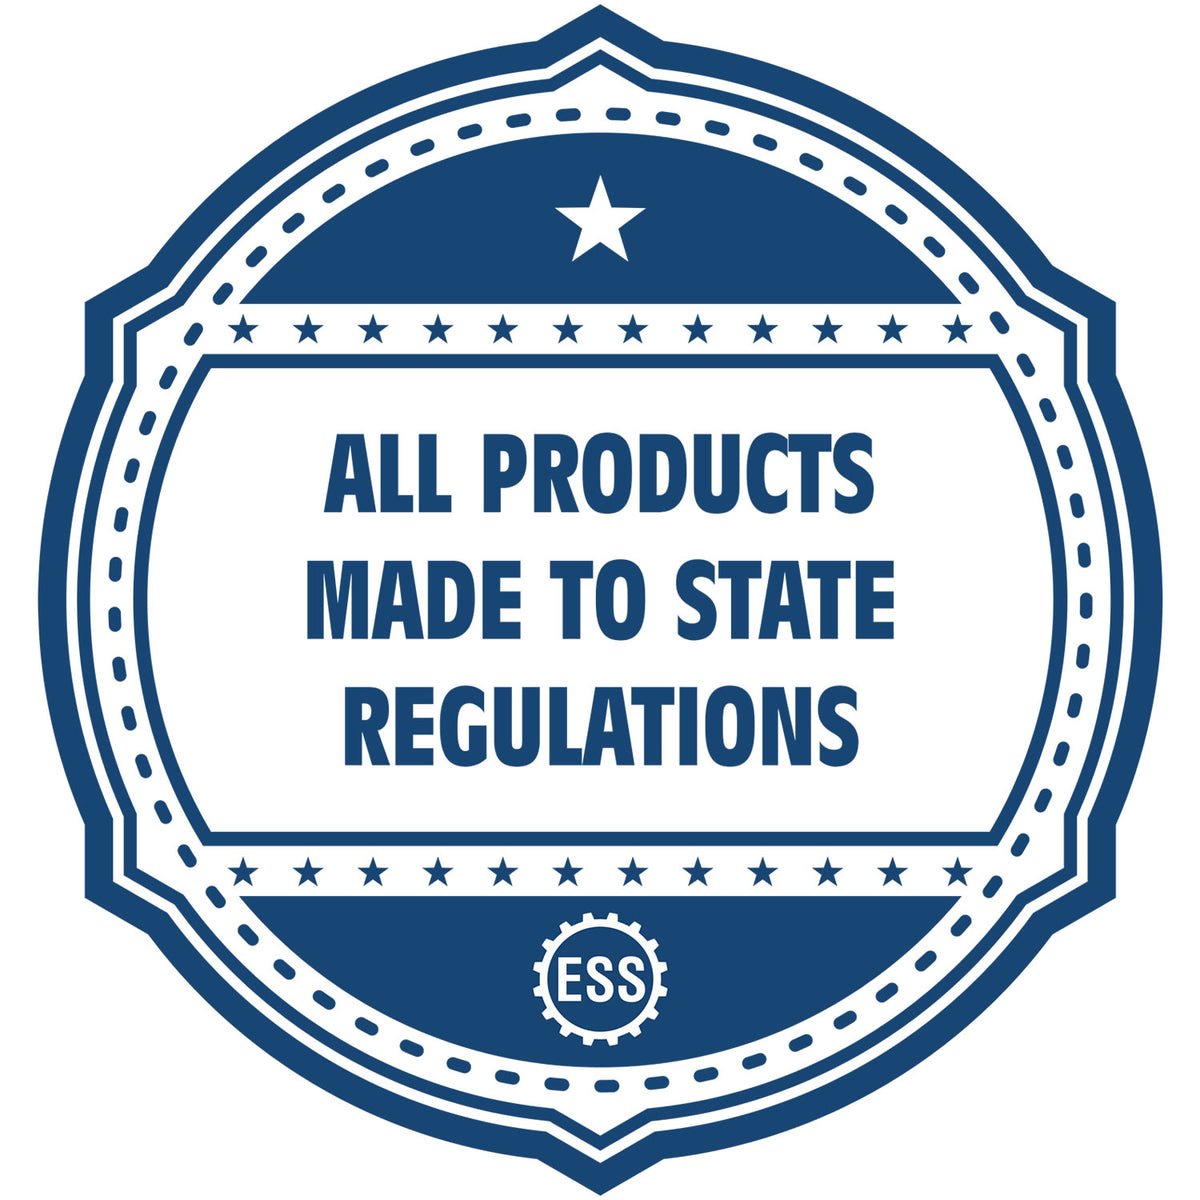 An icon or badge element for the Super Slim Massachusetts Notary Public Stamp showing that this product is made in compliance with state regulations.